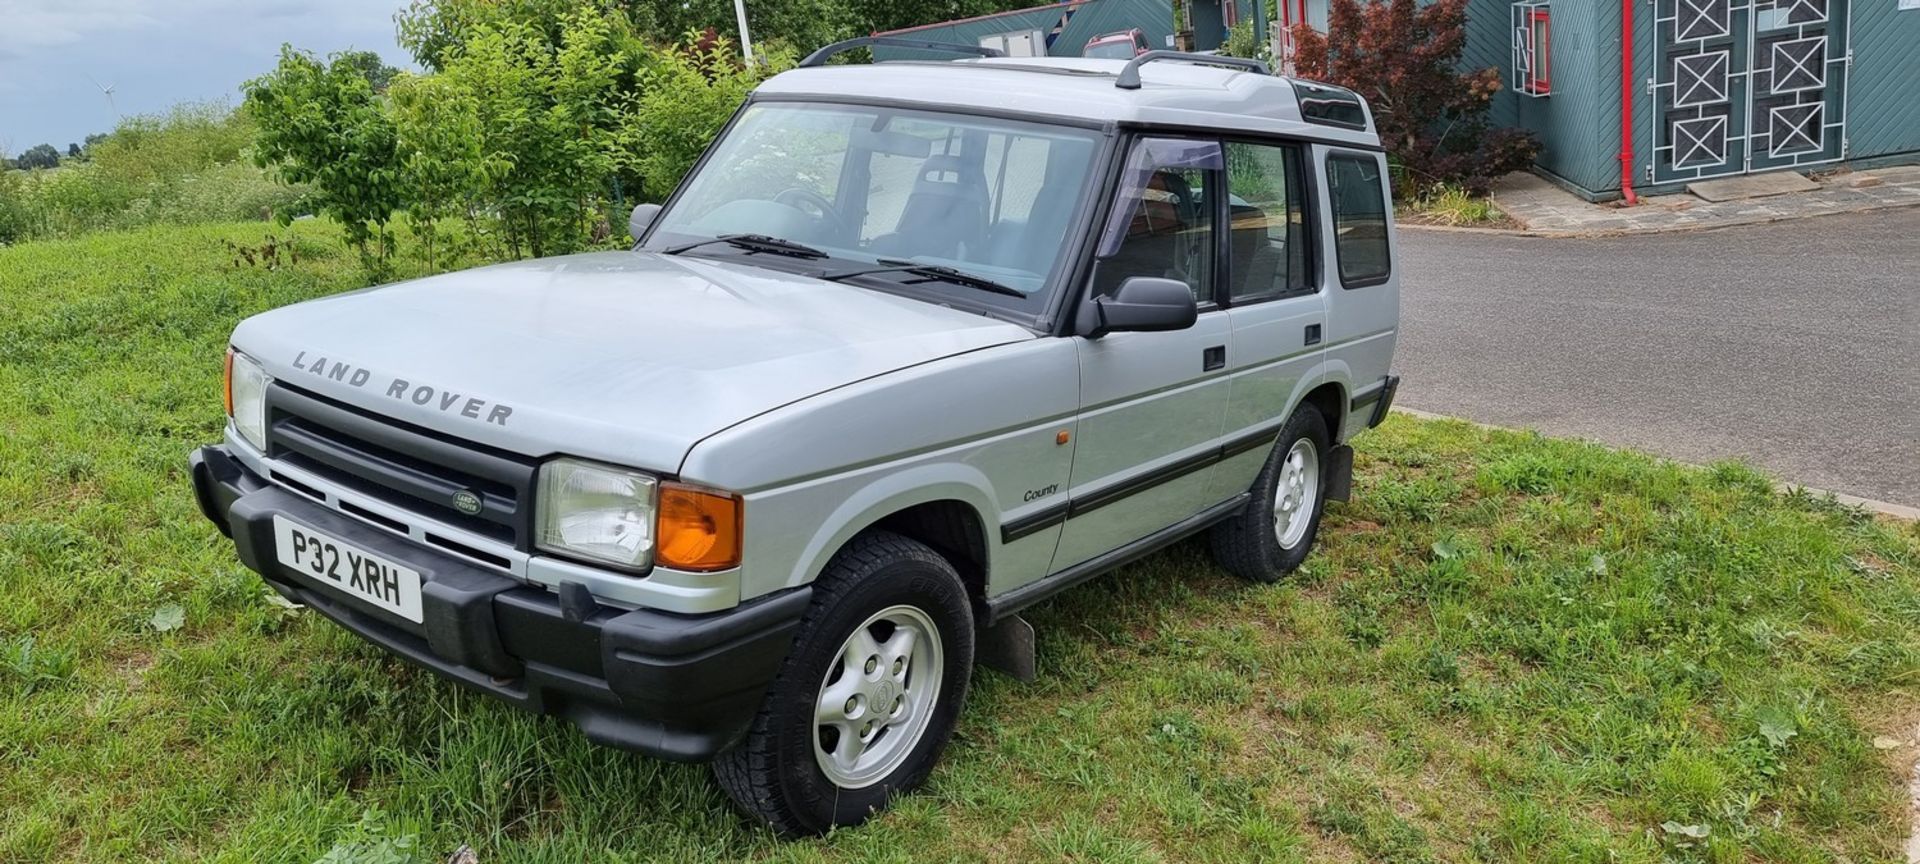 1996 Land Rover Discovery Series 1, 300 TDi, 2495cc automatic. Registration number P32 XRH. - Image 2 of 23